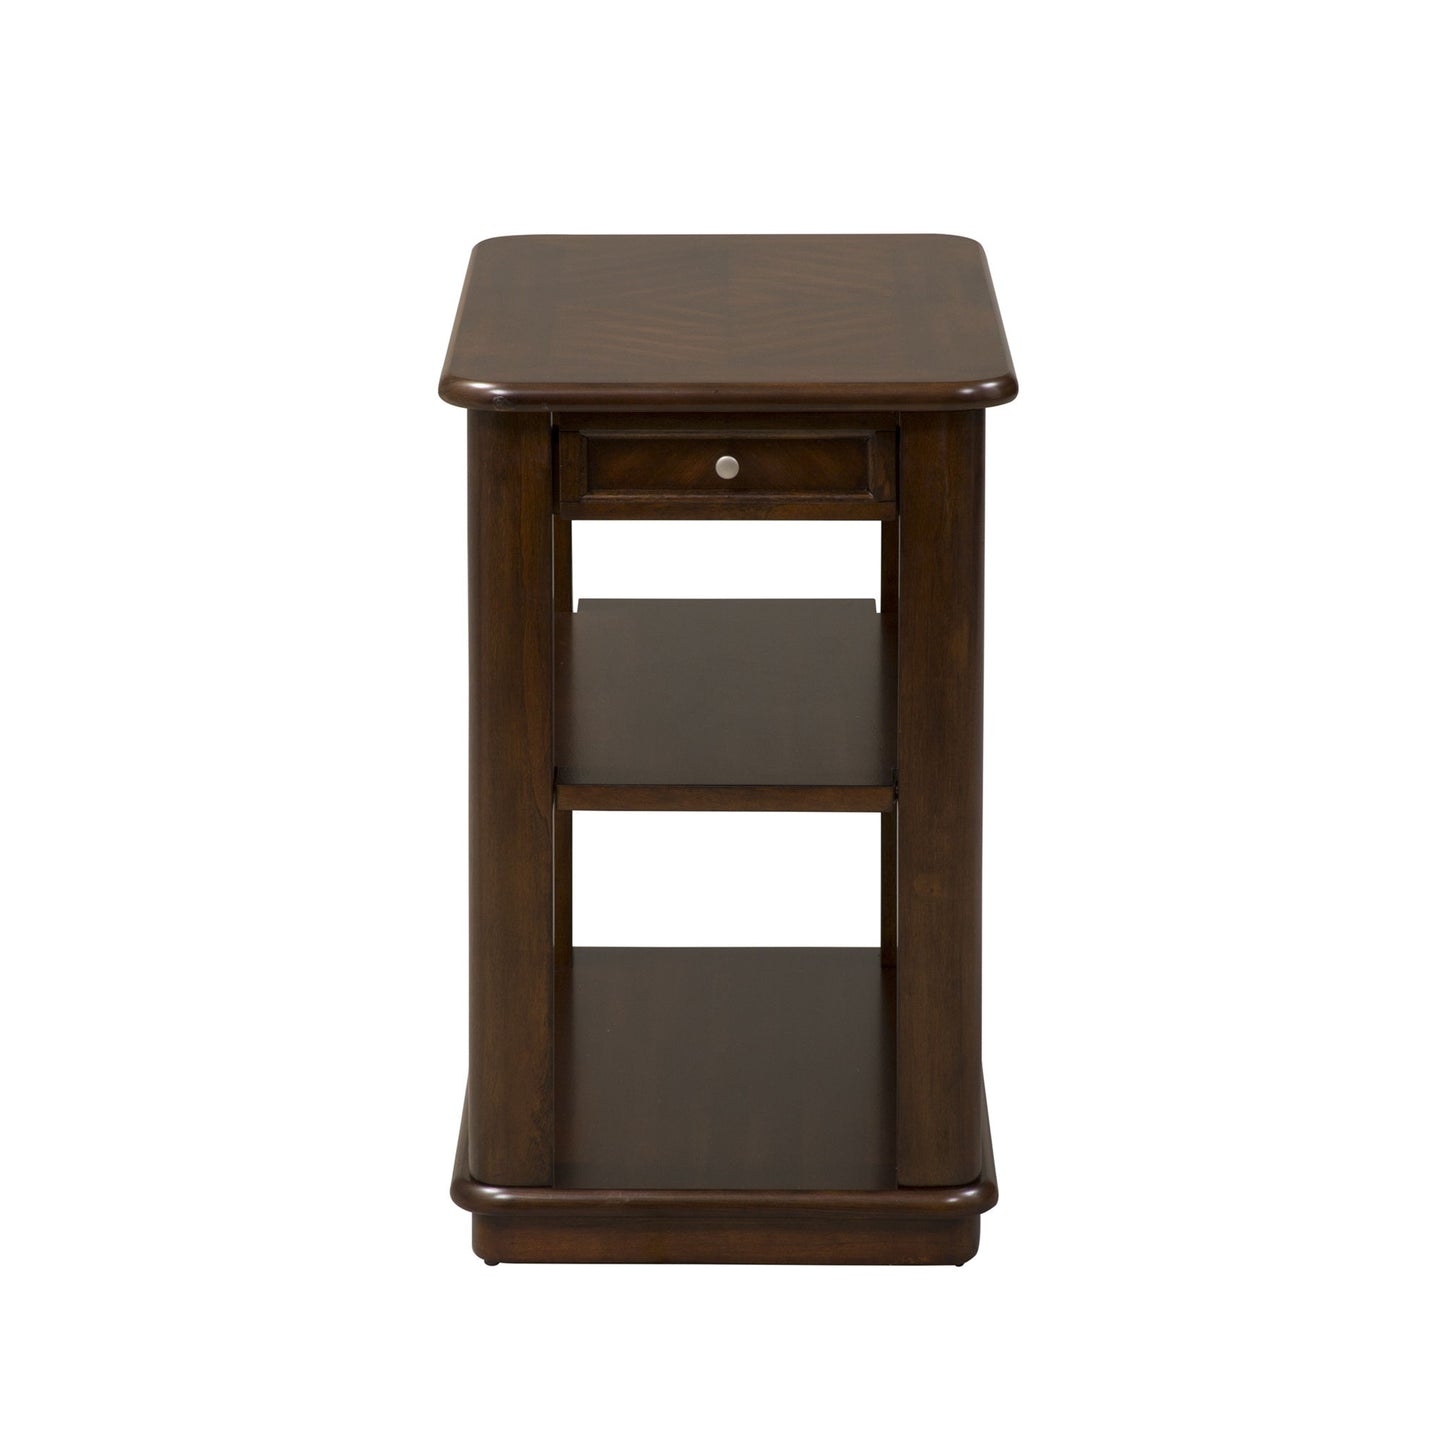 Wallace - Chair Side Table - Dark Brown